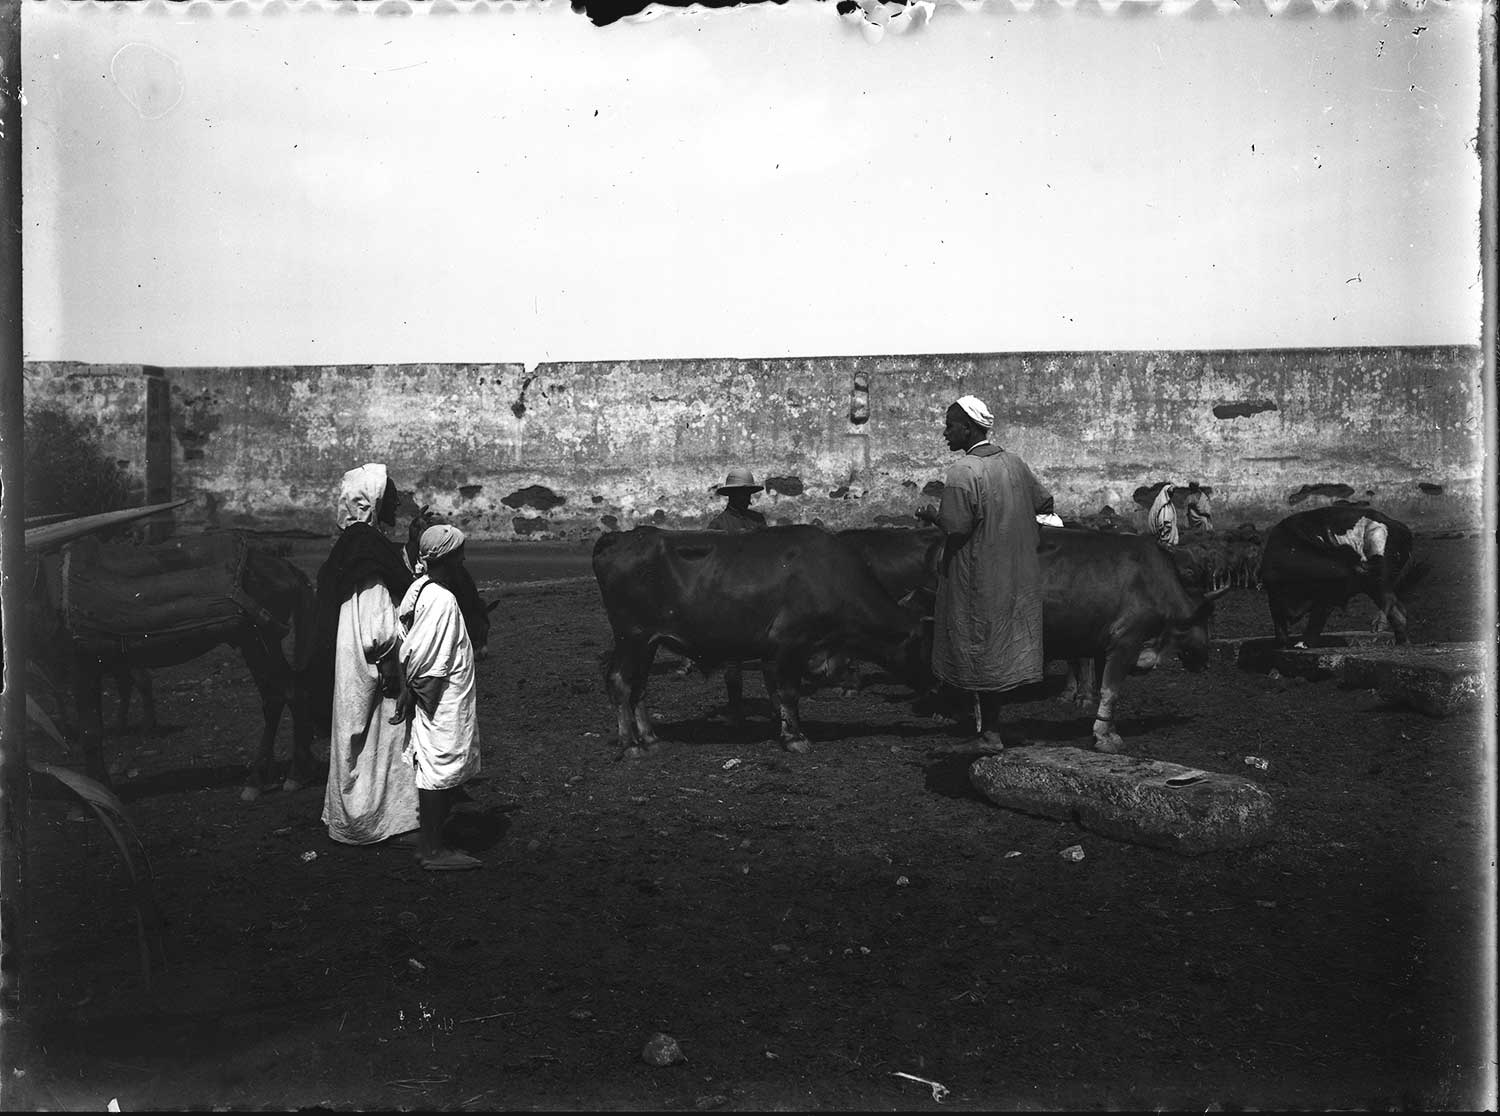 View of a cattle market outside the city walls, probably Marrakech